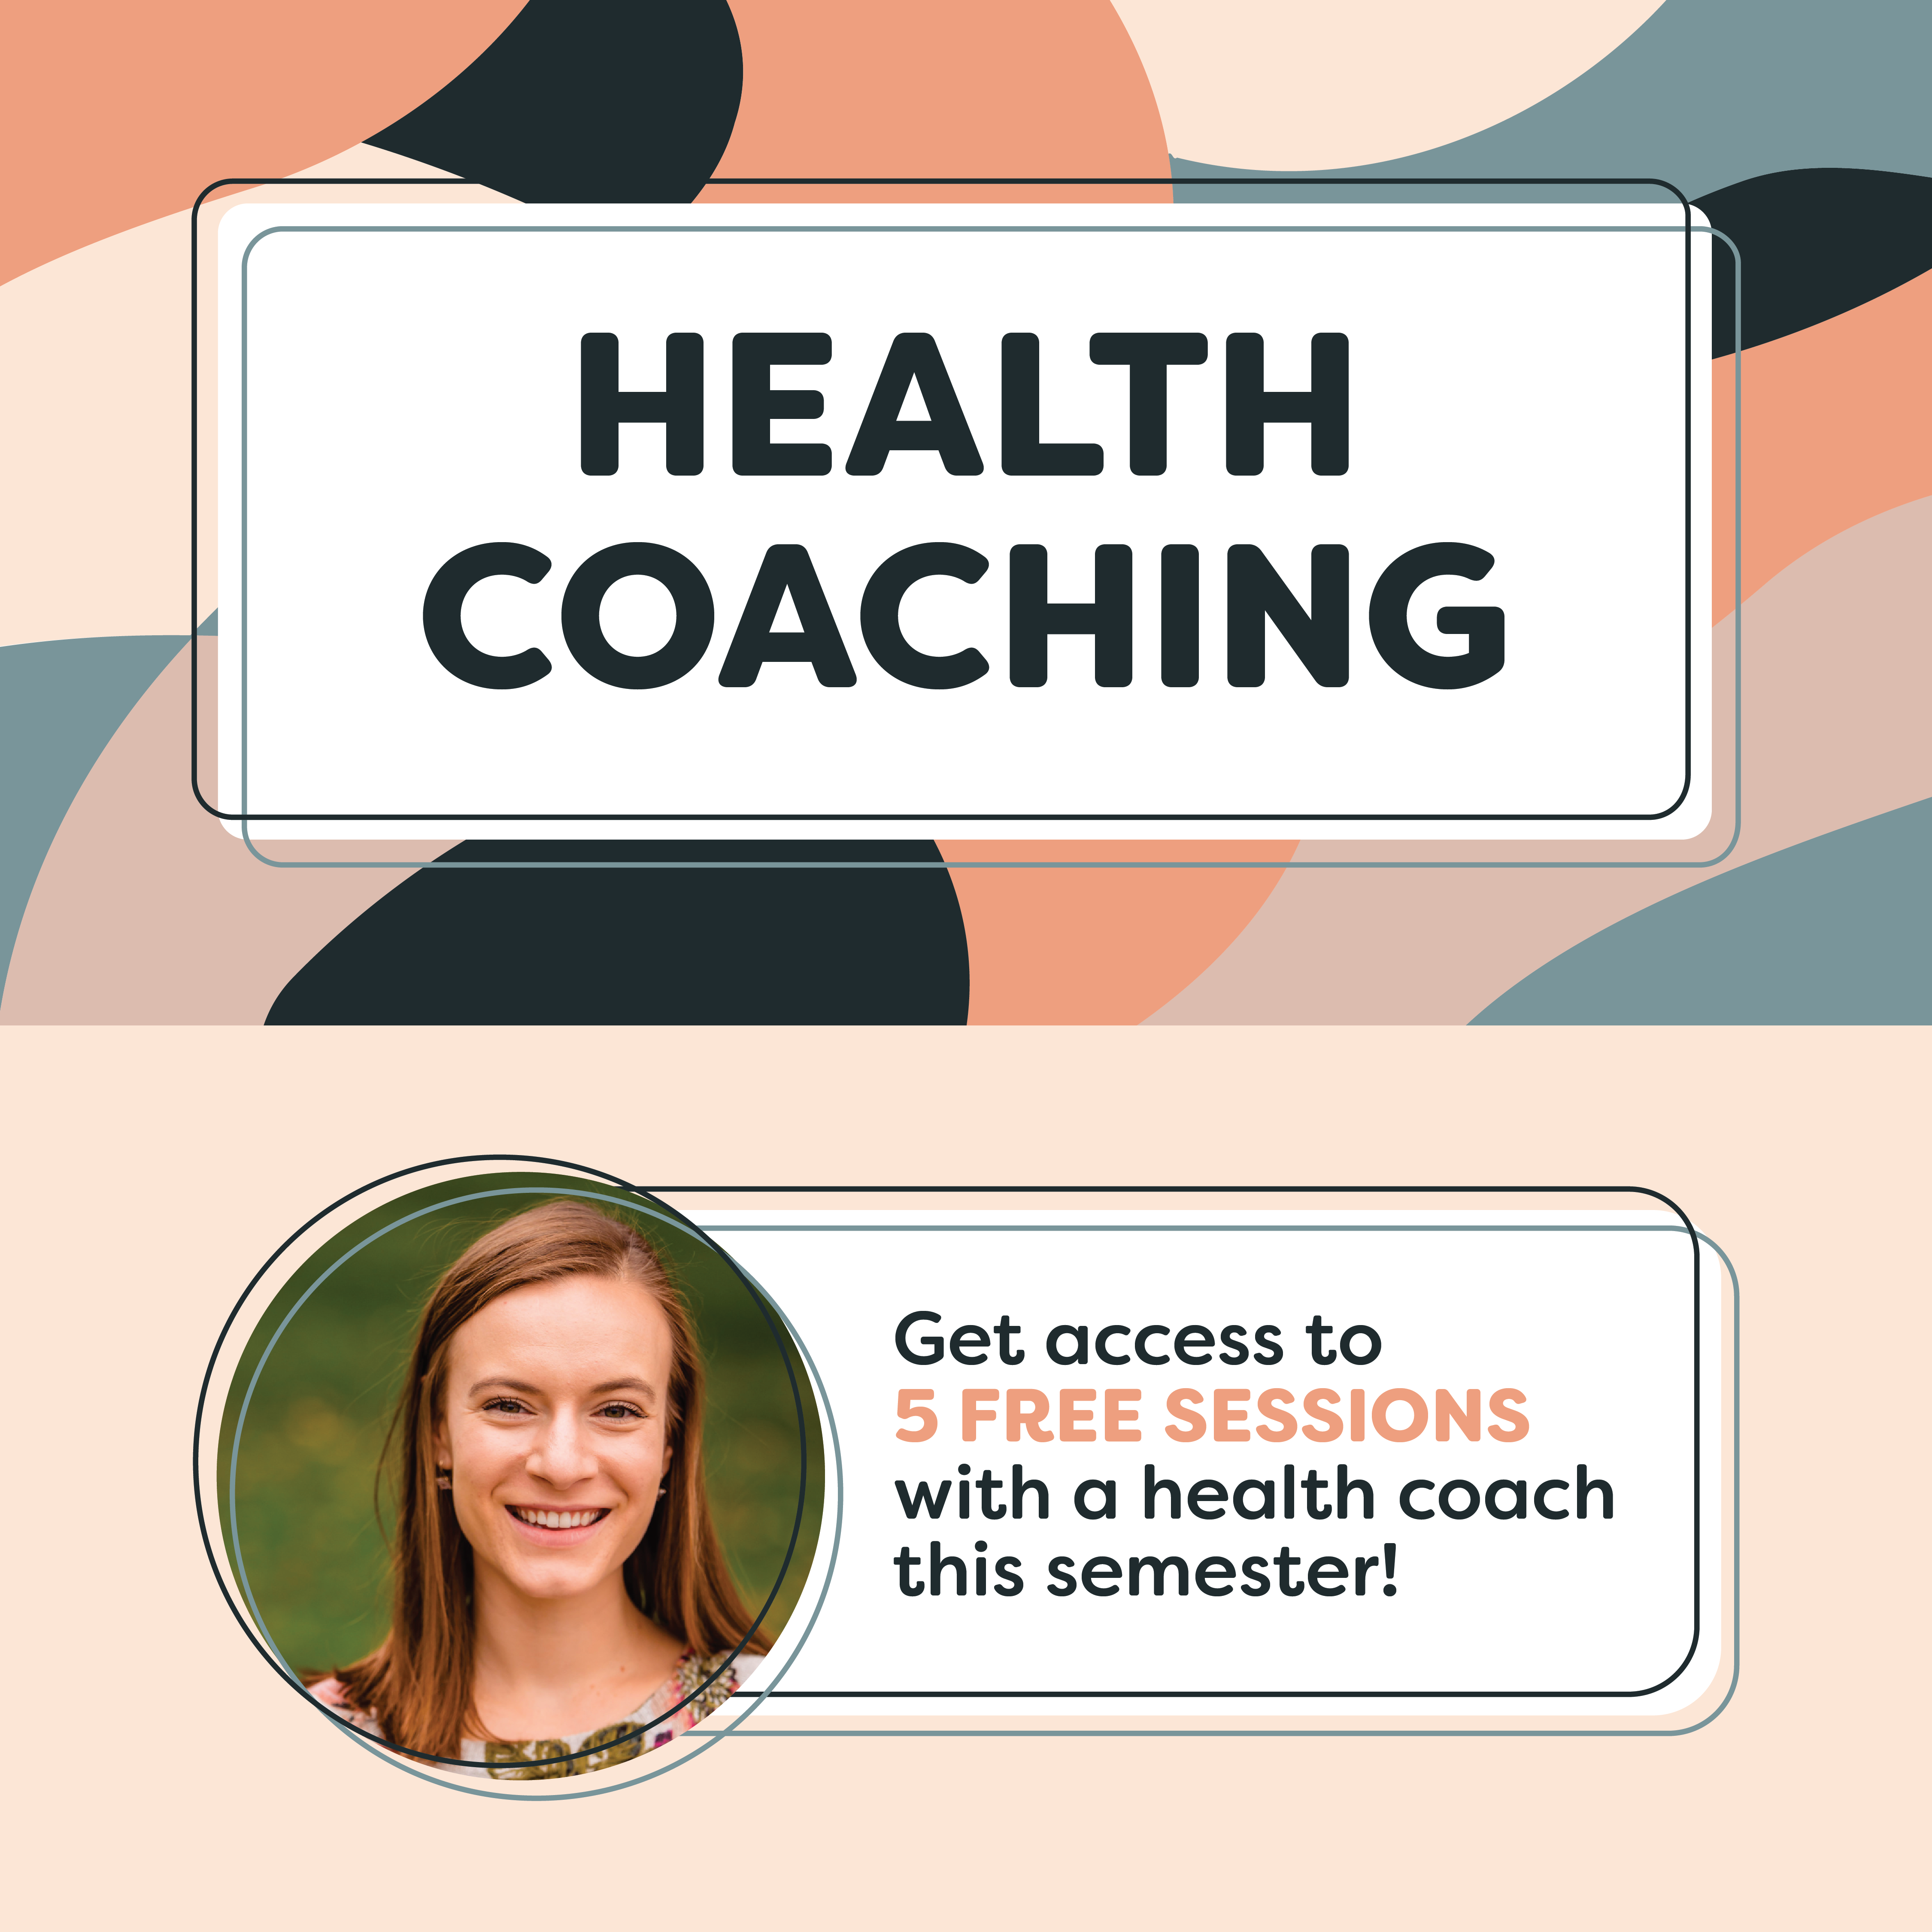 "Health Coaching" text with picture of health coach